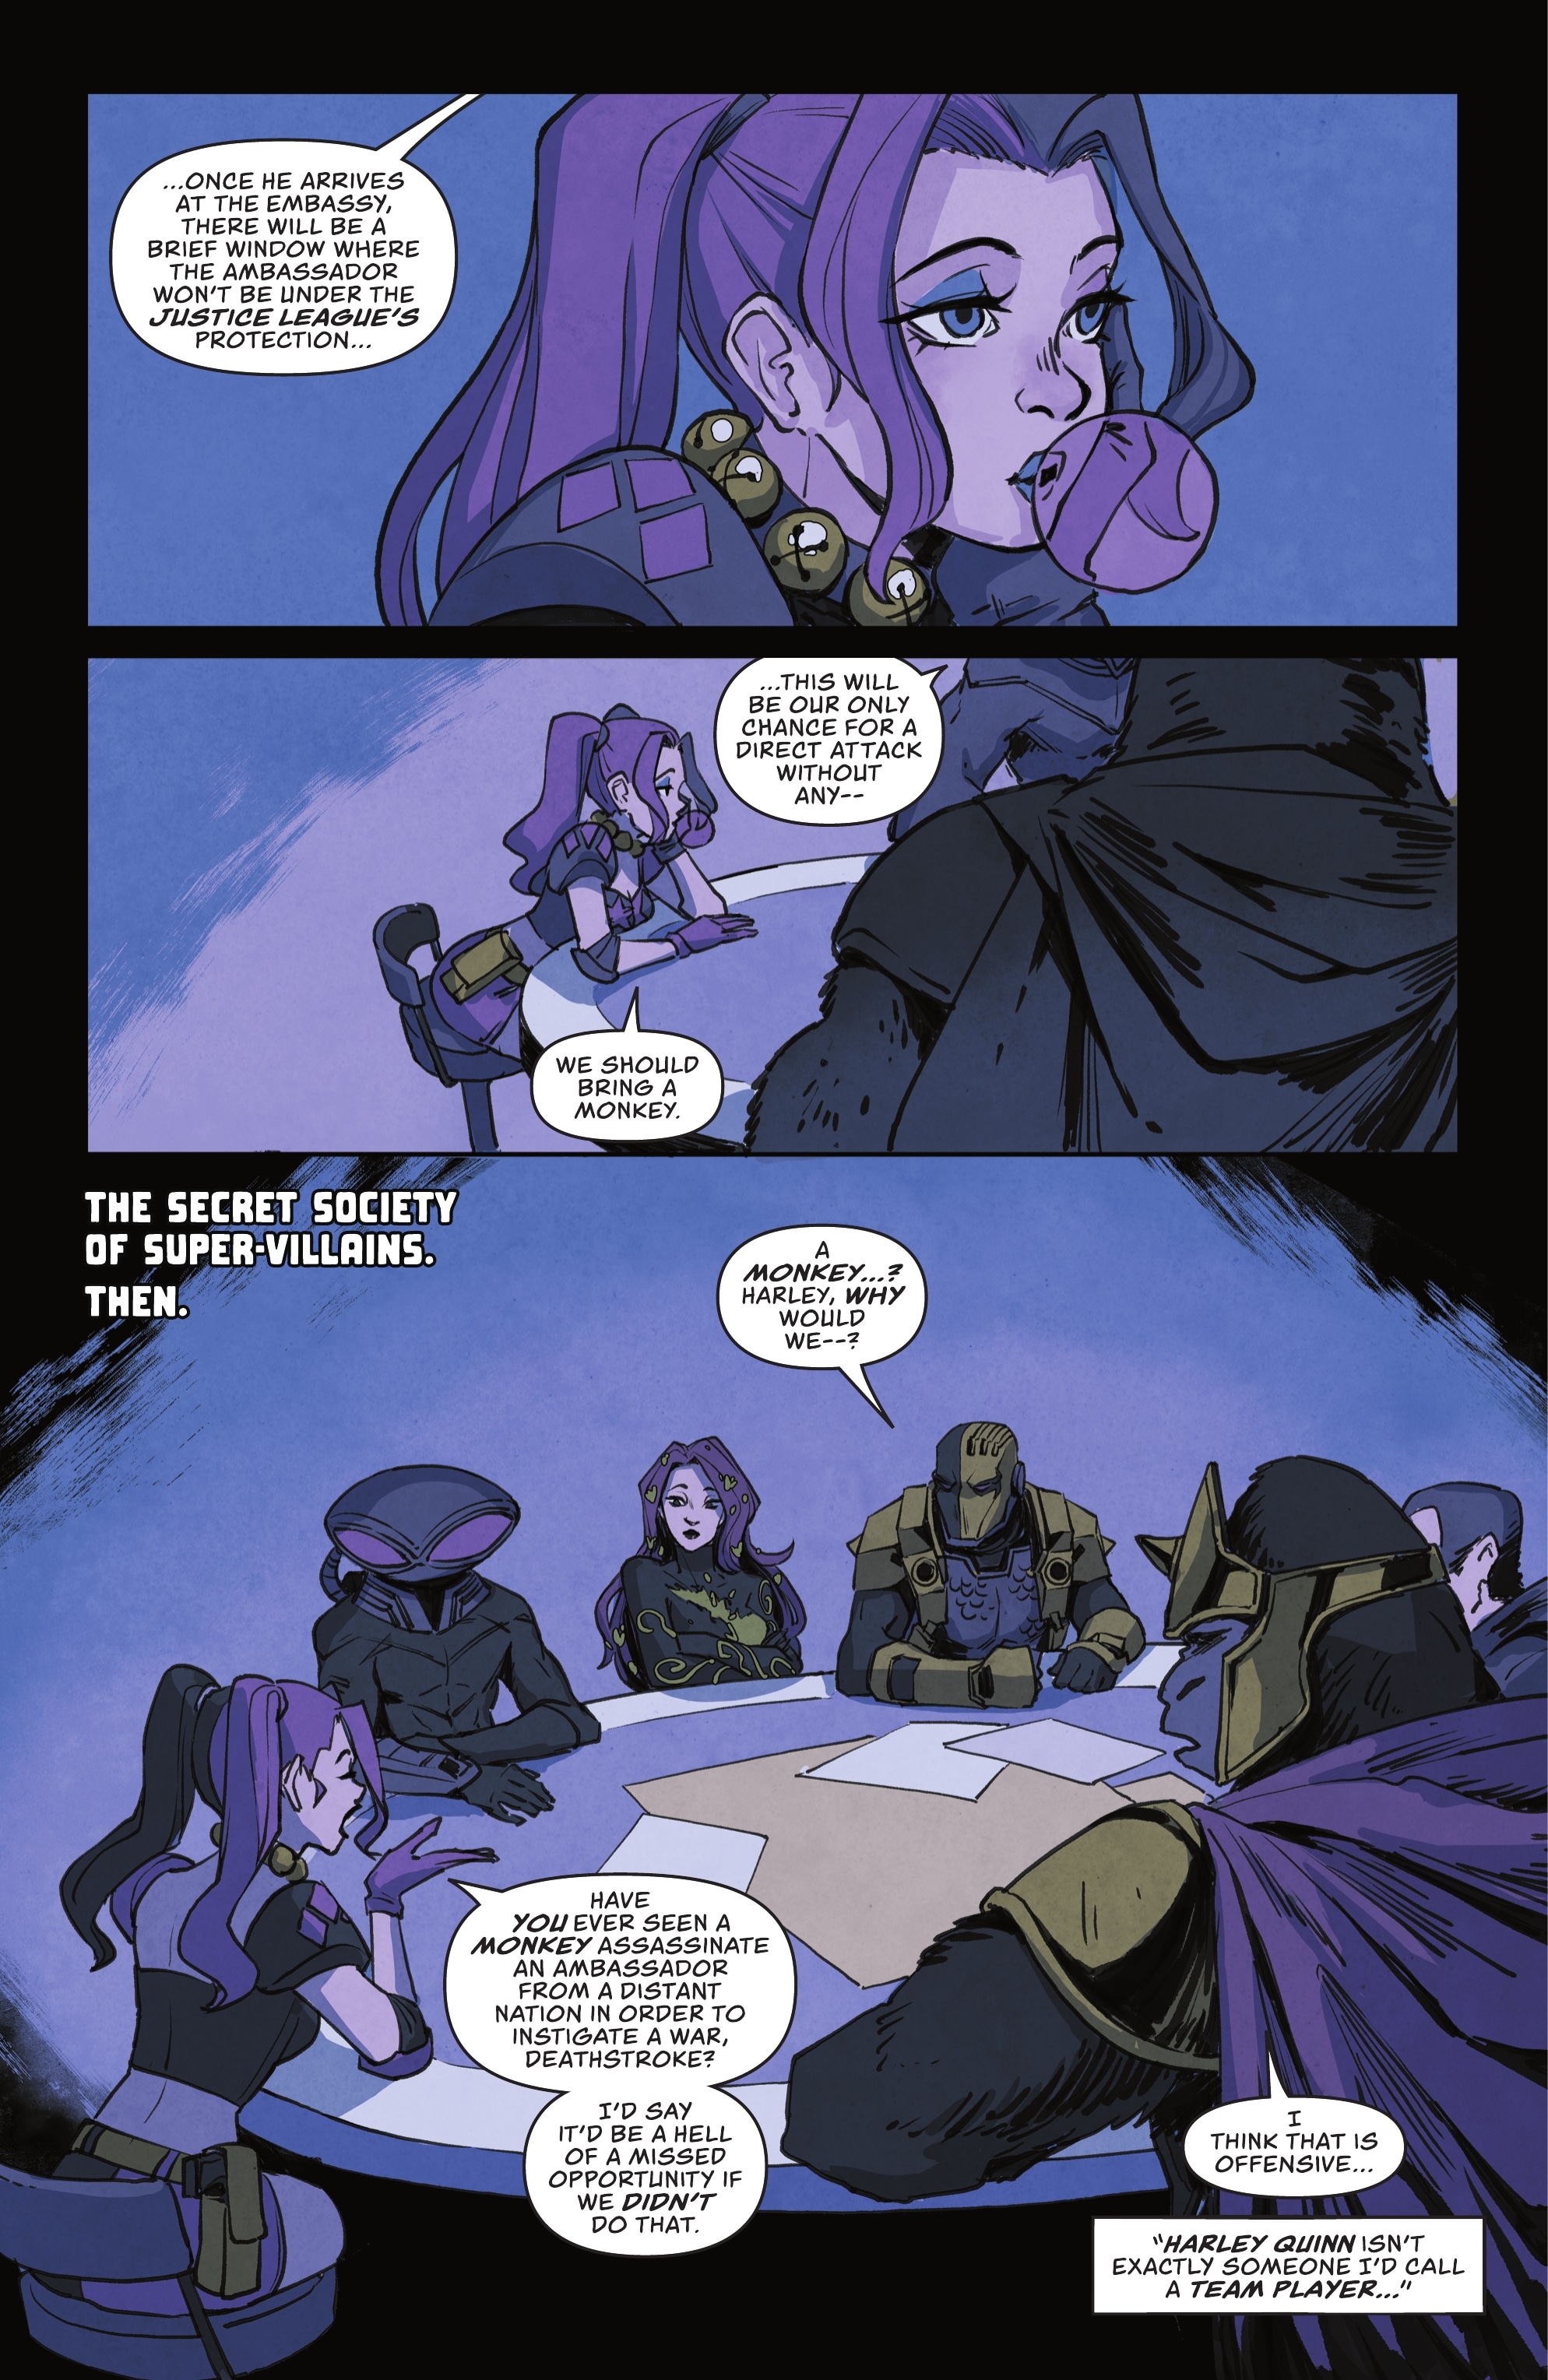 Shadow War Zone (2022) Chapter 1 Page 1